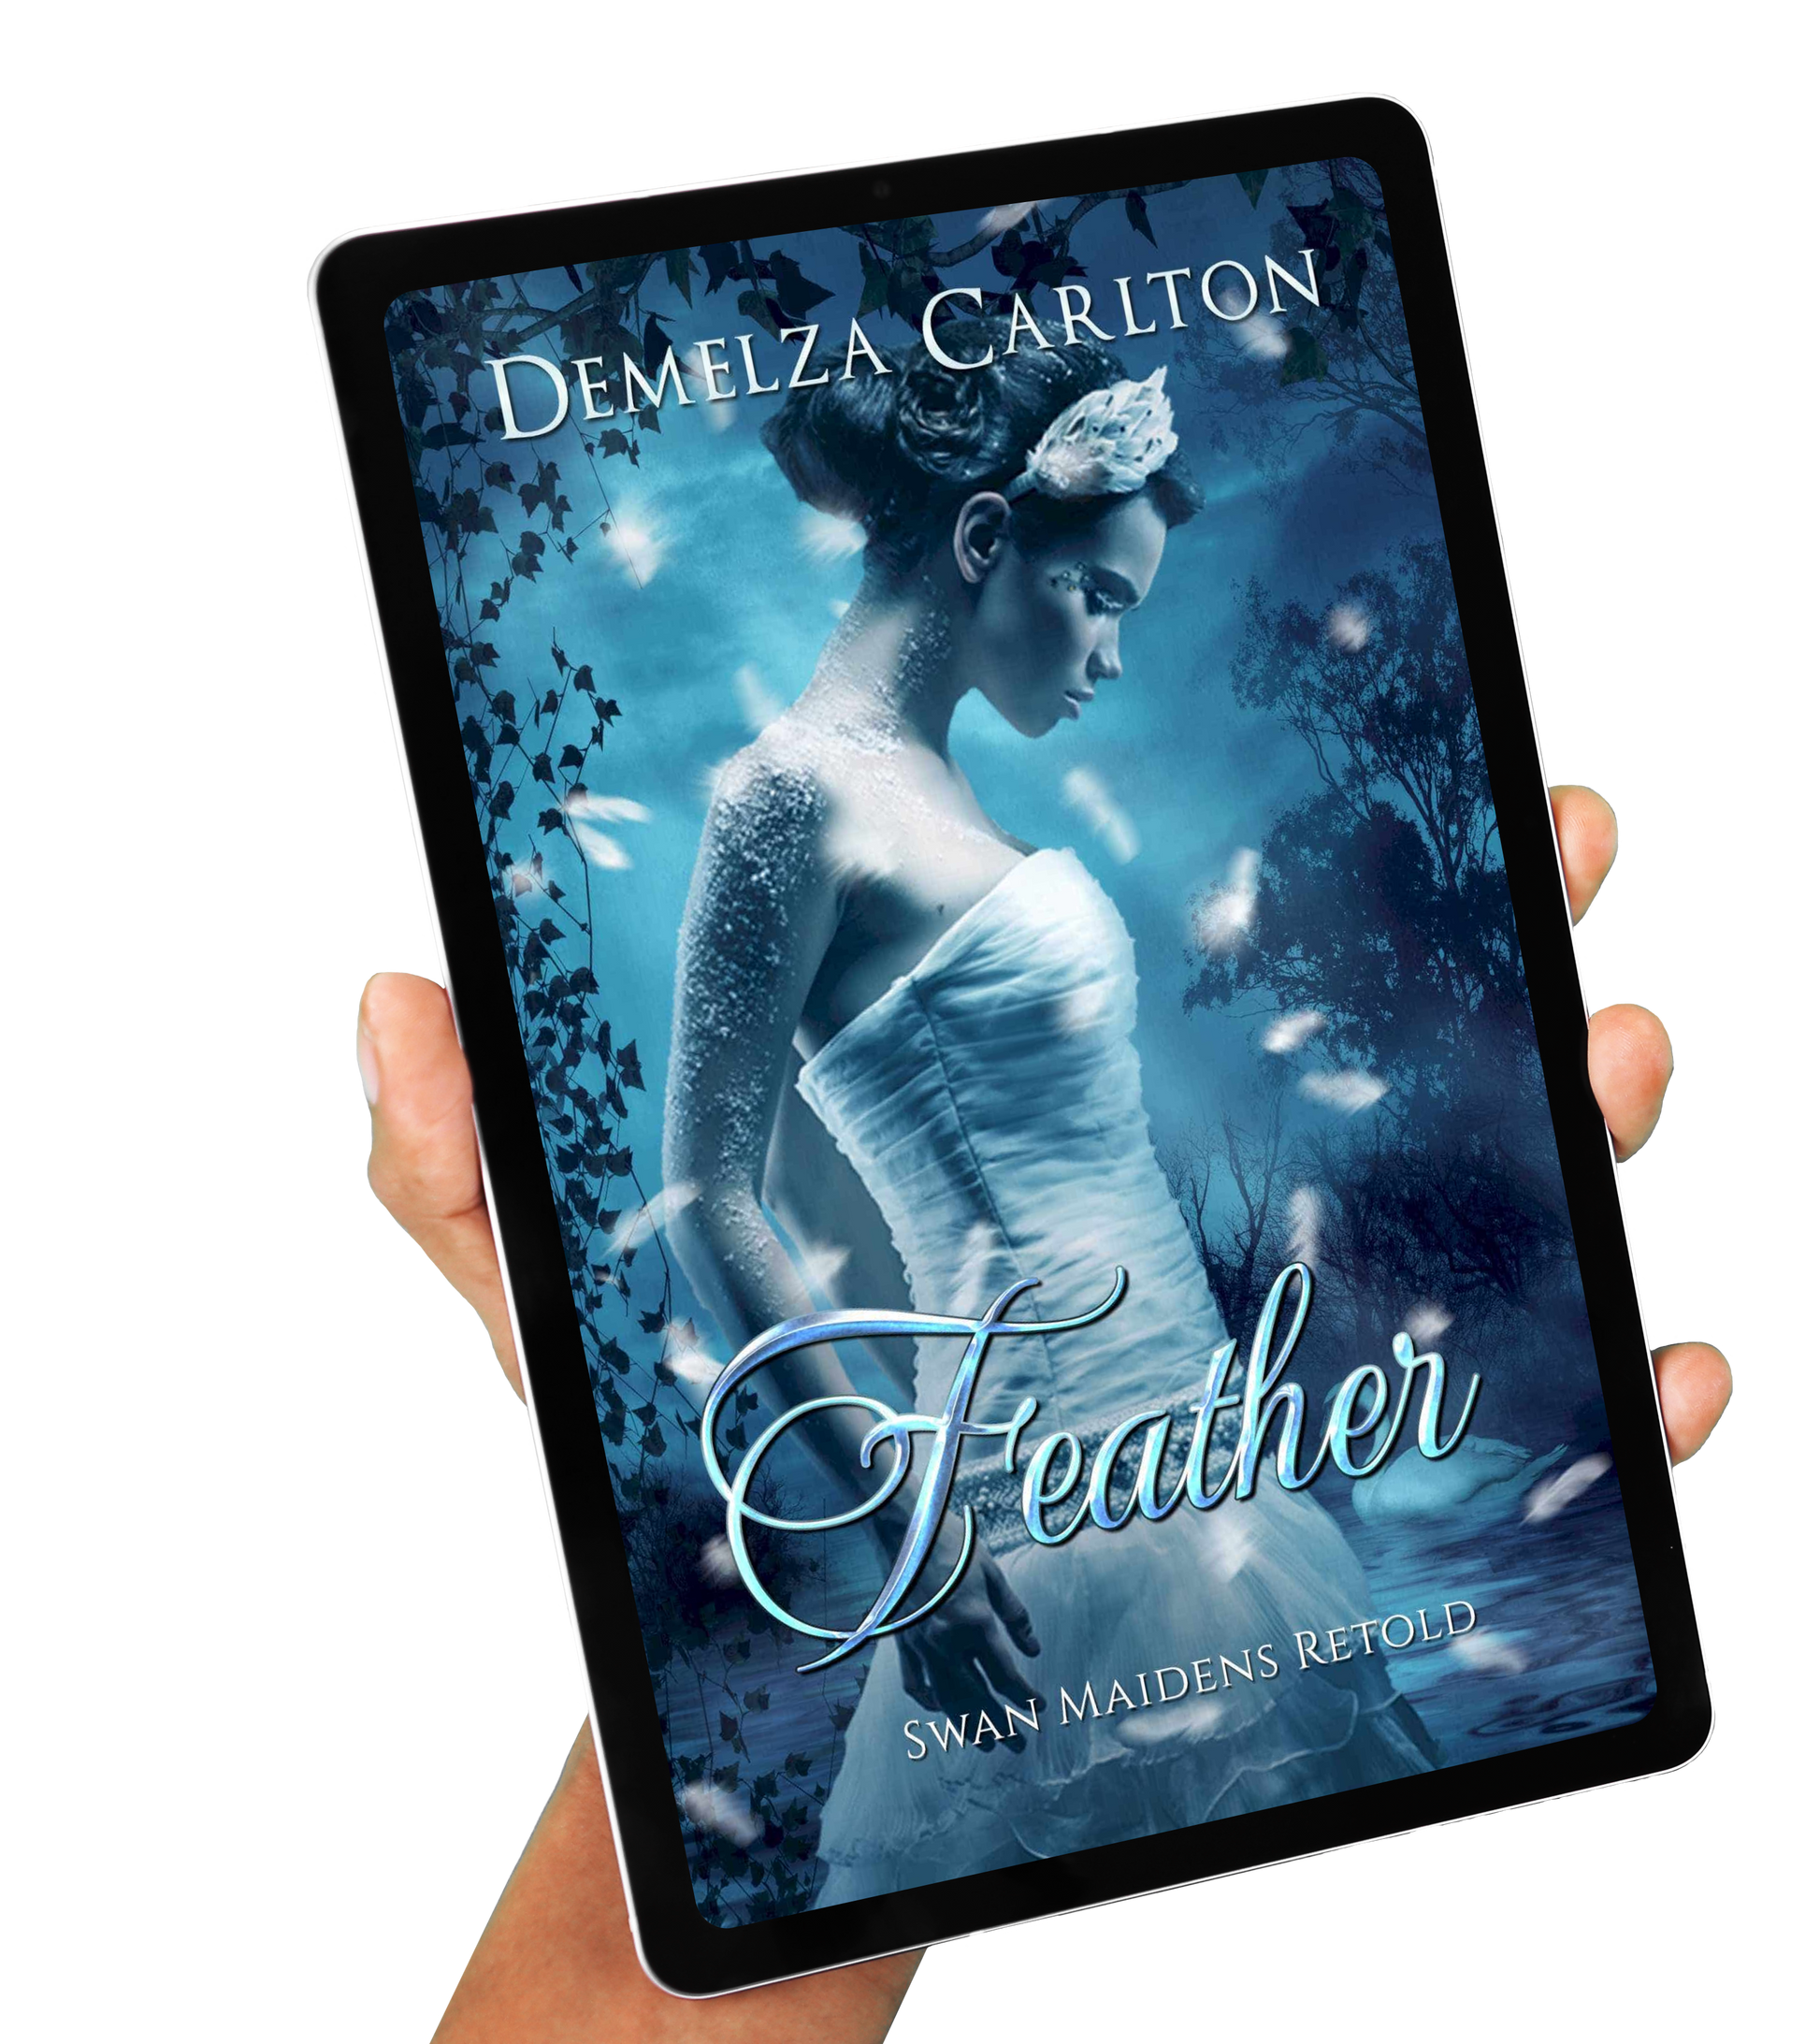 A steamy romantasy fairytale retelling of the Swan Maidens for fans of Sarah J Maas, ACOTAR, Raven Kennedy, Charlaine Harris, Juliet Marillier and Rebecca Yarros